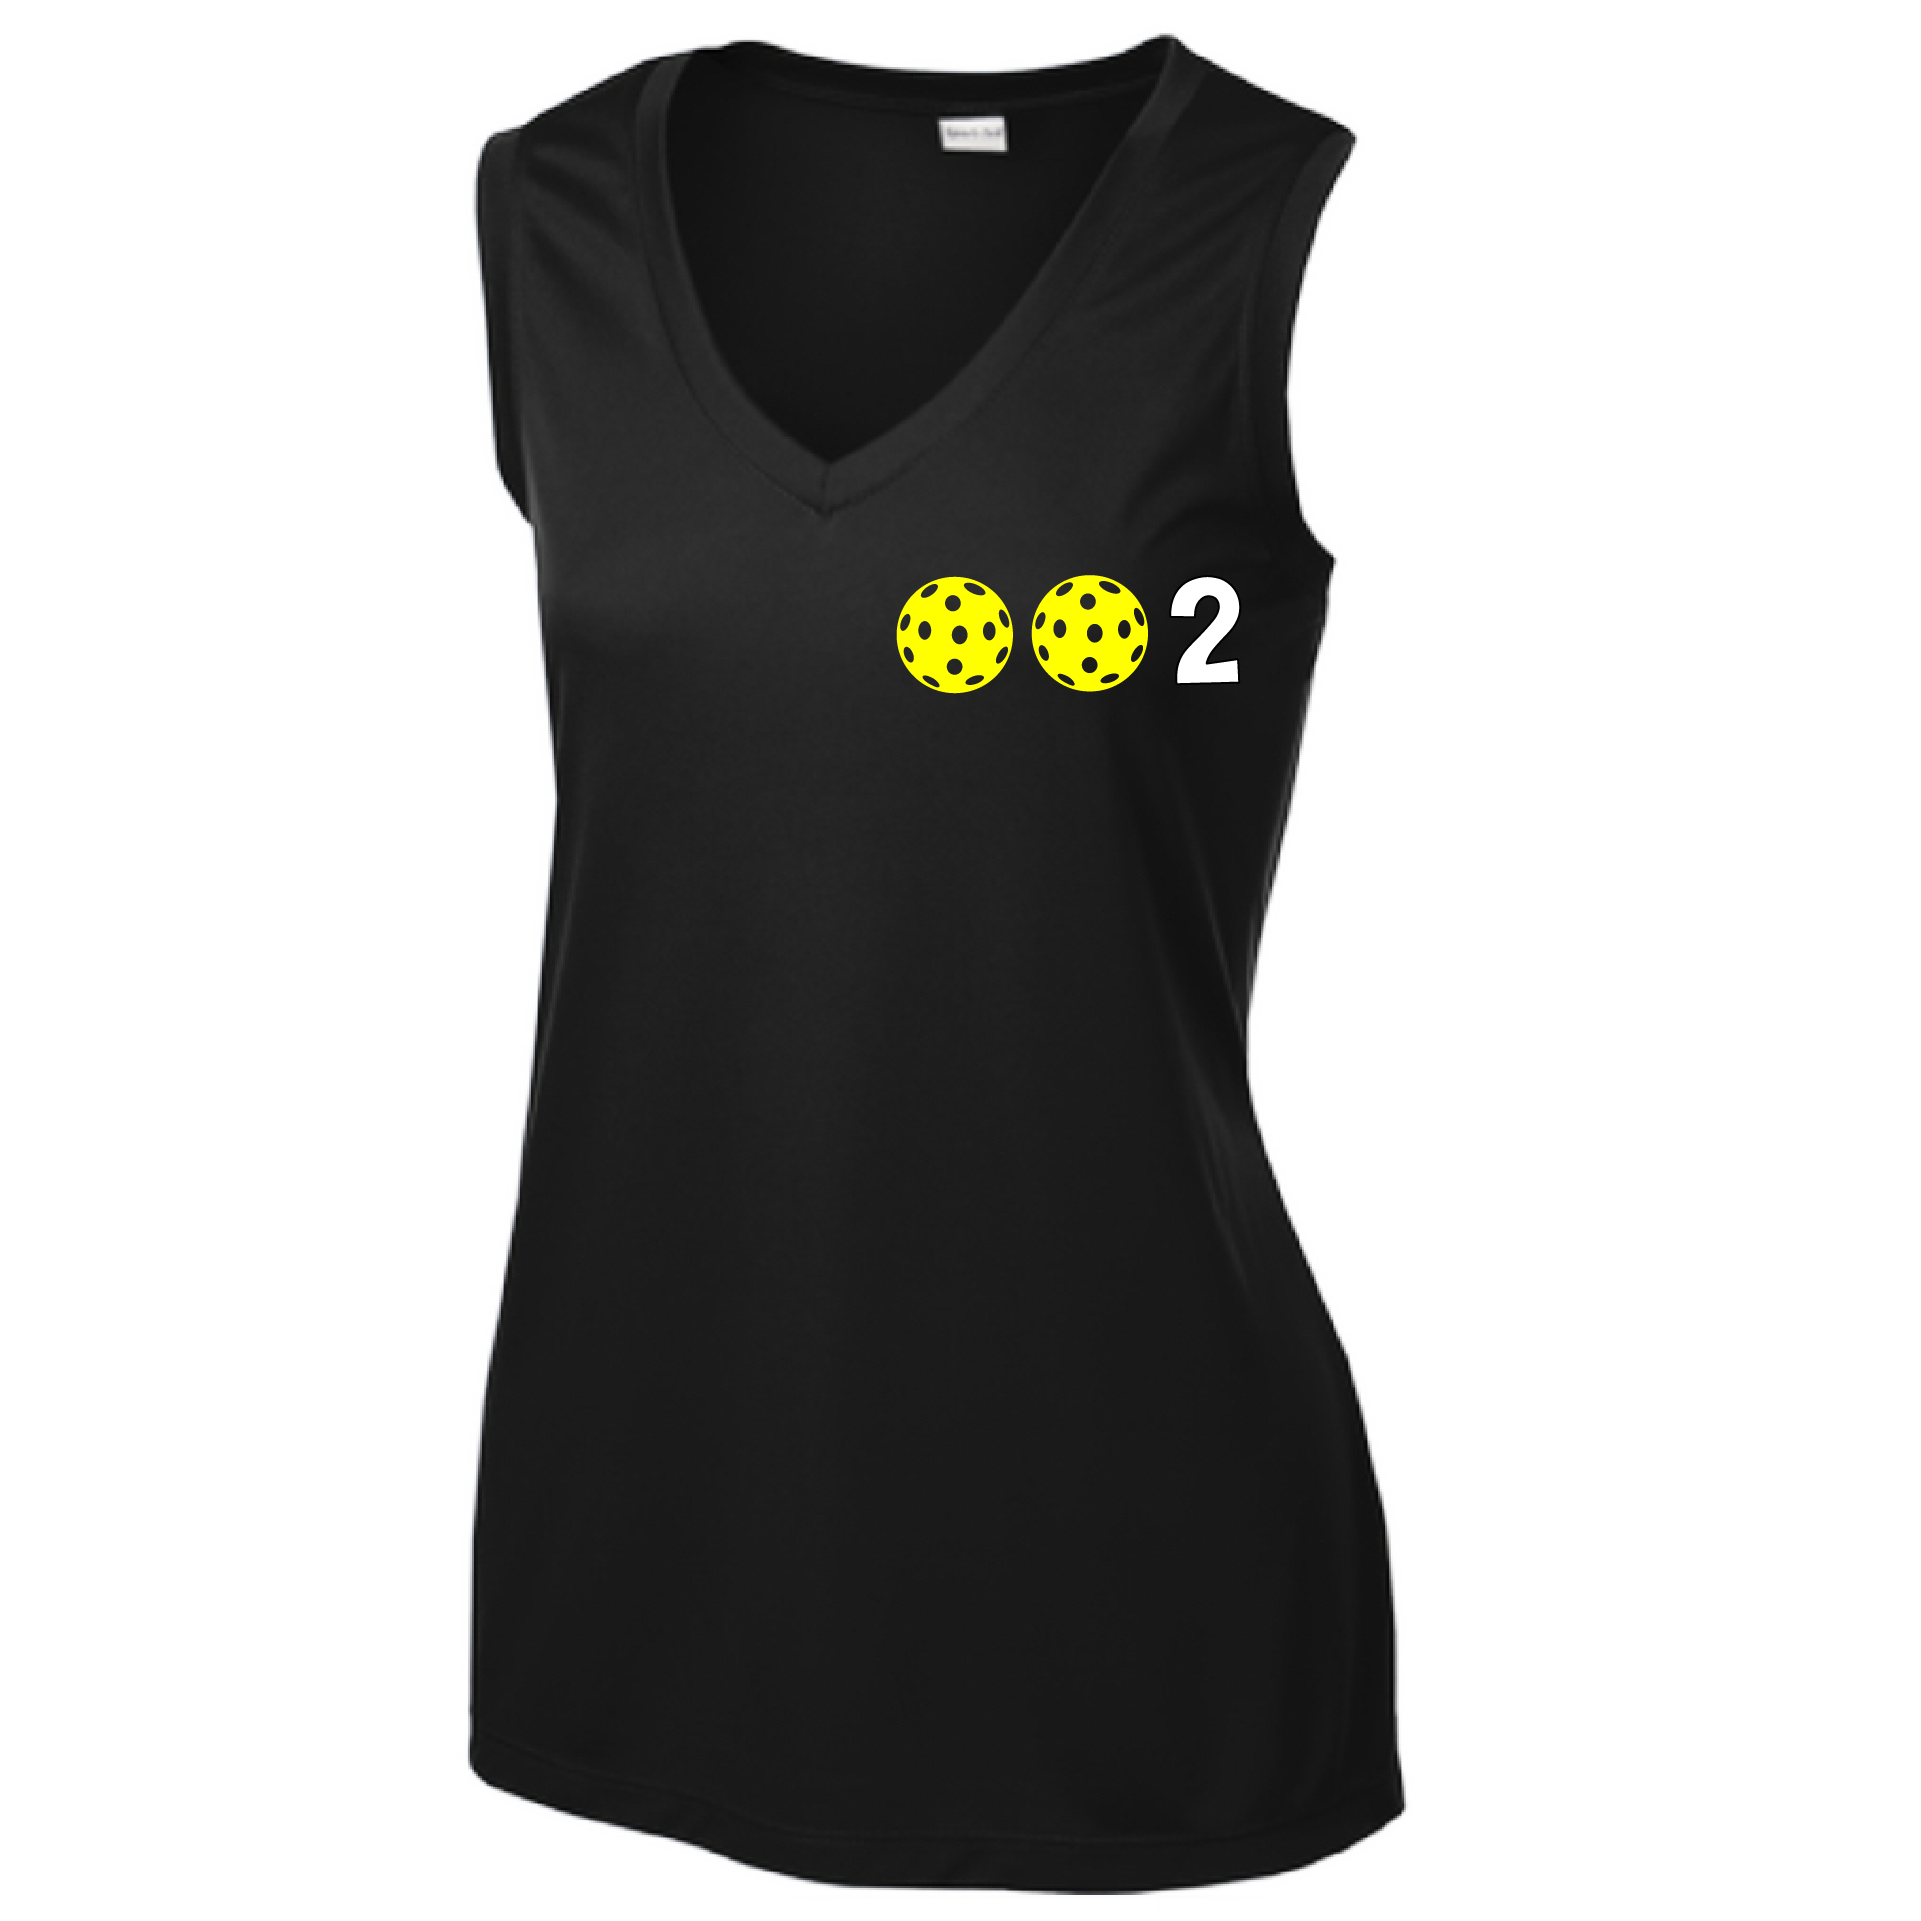 Design: 002 with Customizable Pickleball Ball Colors (Yellow, Green, White, Purple, Pink)  Women's Style: Sleeveless Tank  Shirts are lightweight, roomy and highly breathable. These moisture-wicking shirts are designed for athletic performance. They feature PosiCharge technology to lock in color and prevent logos from fading. Removable tag and set-in sleeves for comfort.